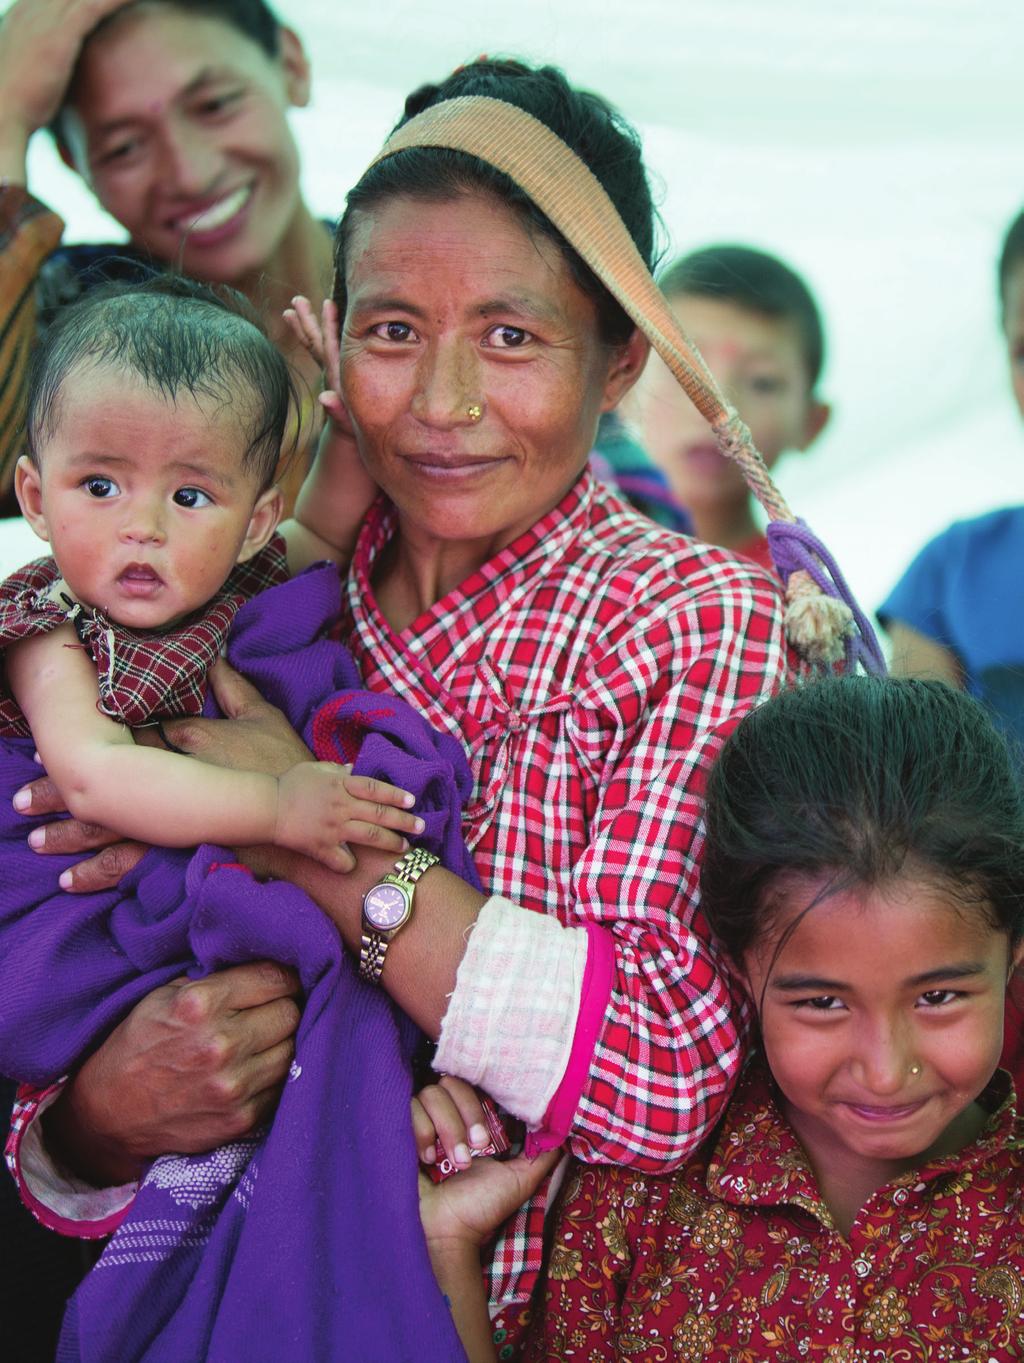 AbbVie and the AbbVie Foundation provide medicines and grants to relief partners to help those affected by